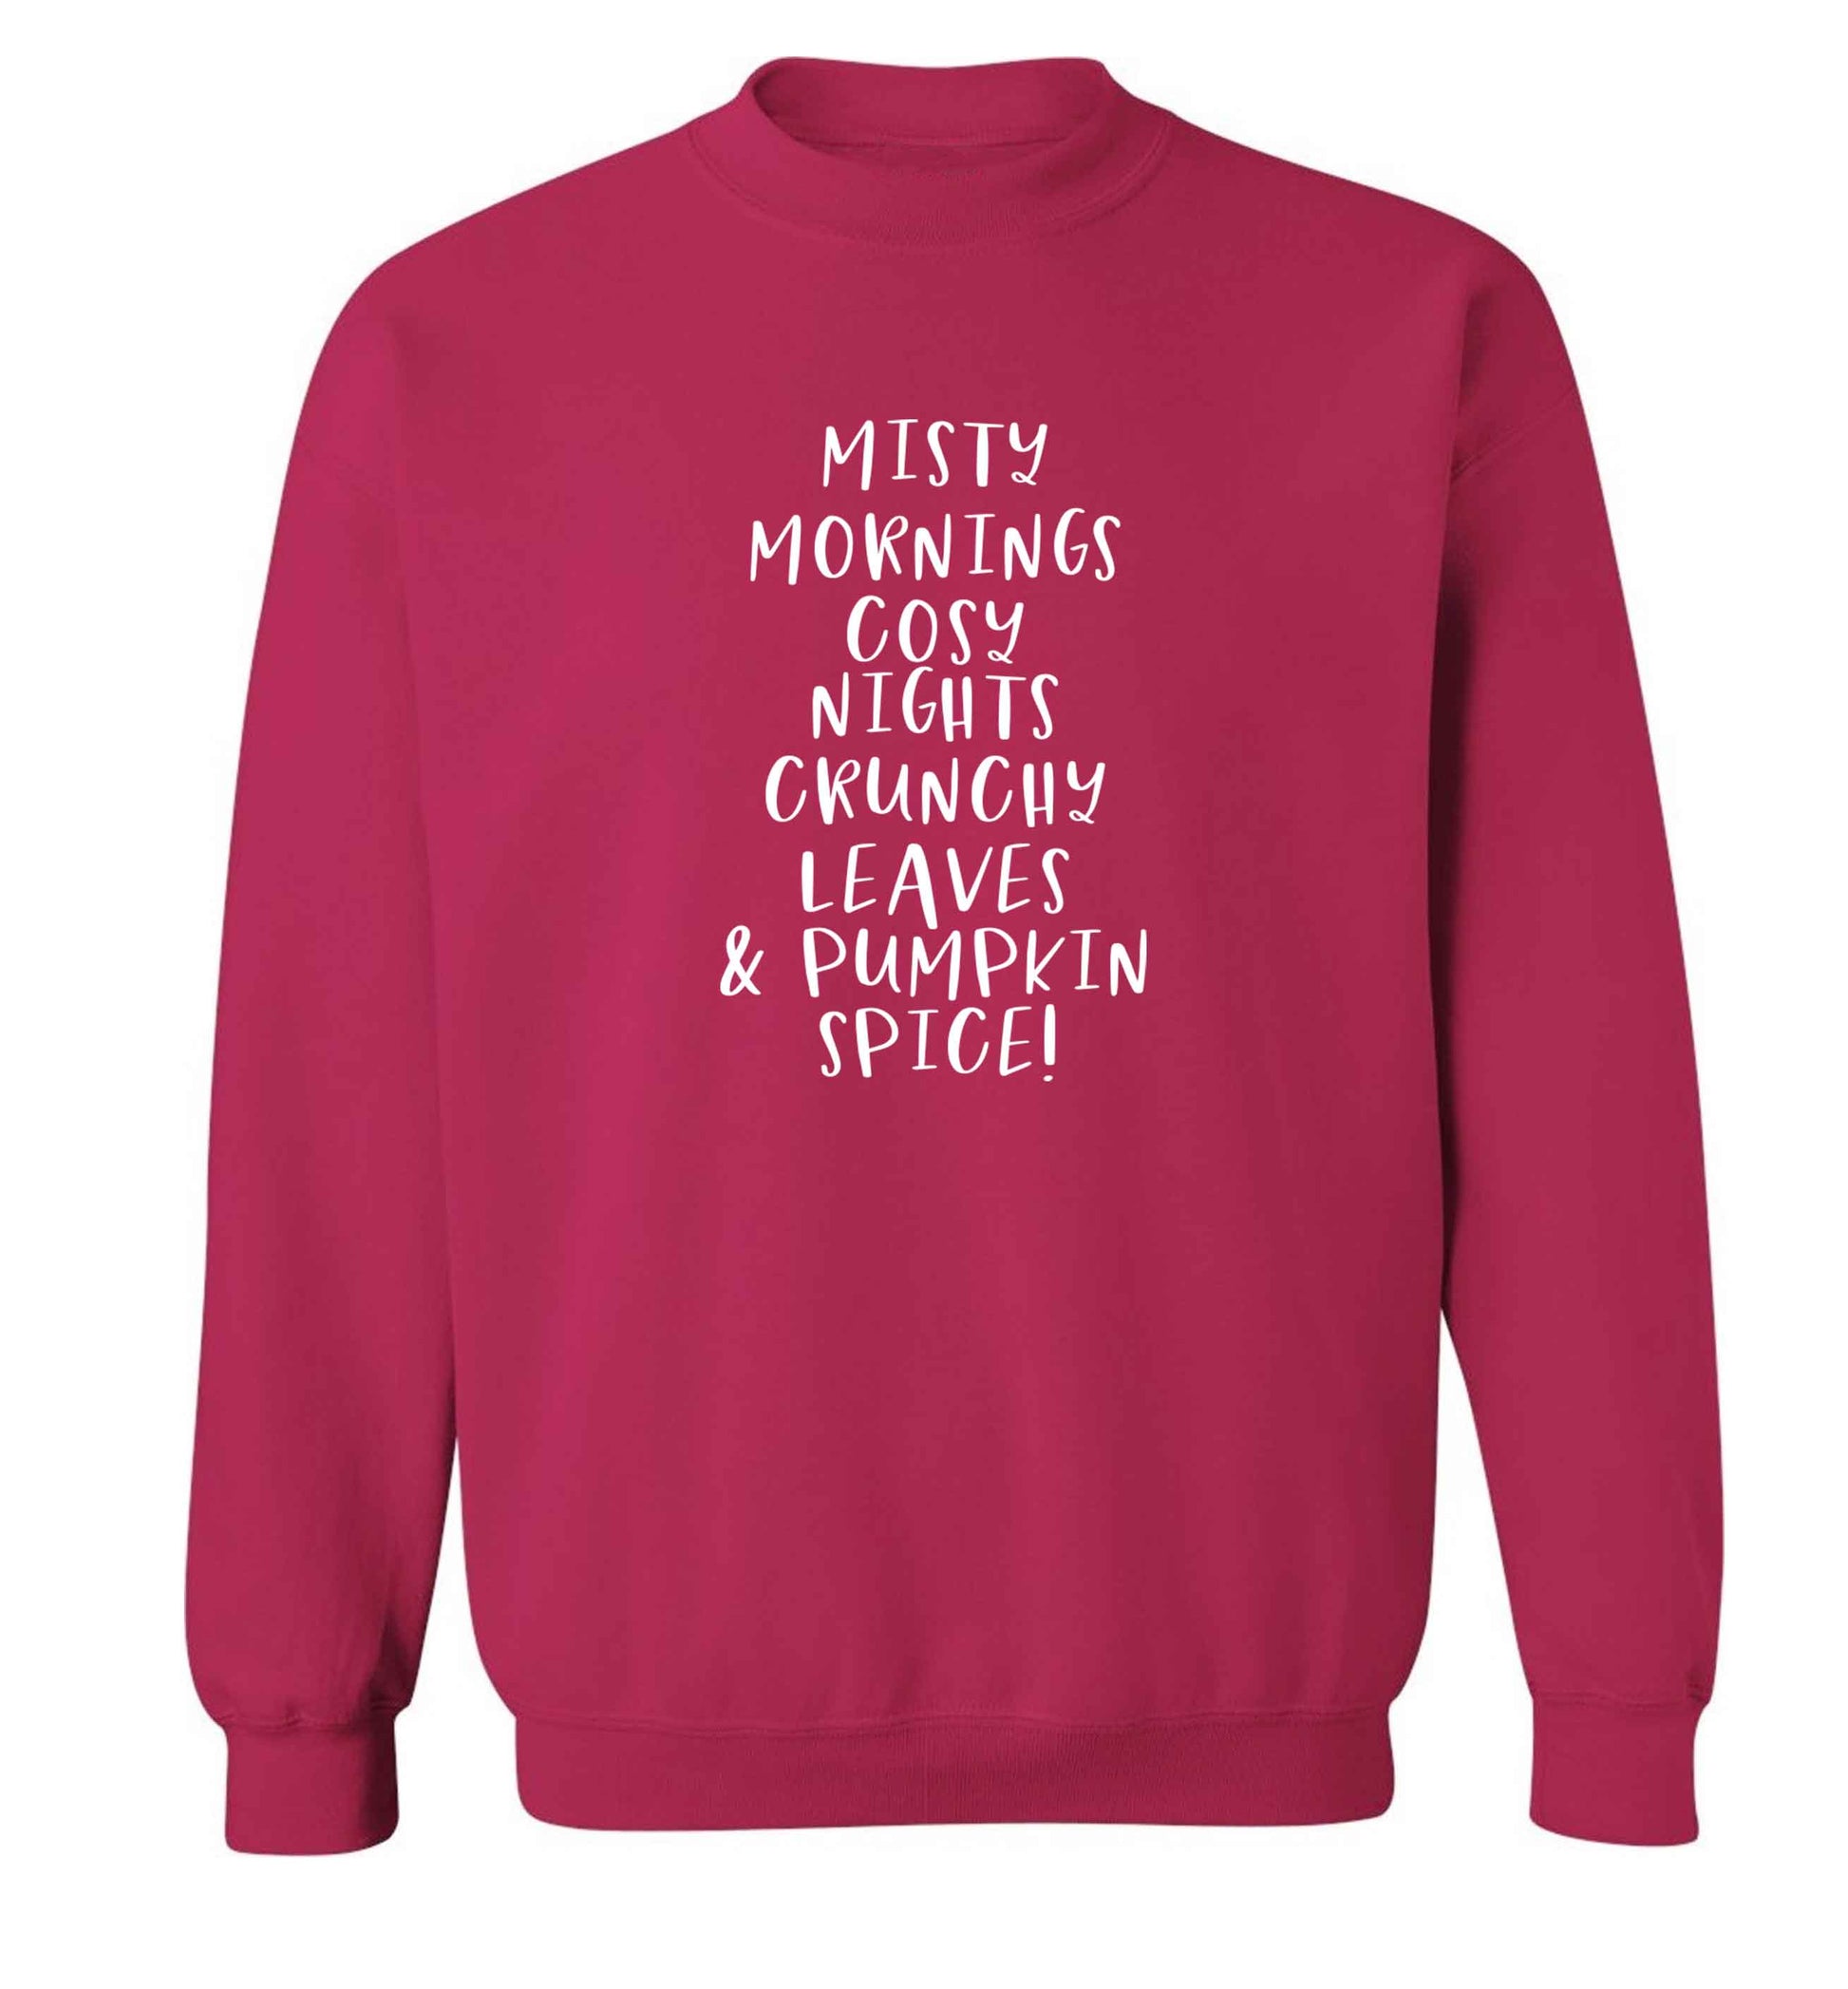 Misty Mornings adult's unisex pink sweater 2XL